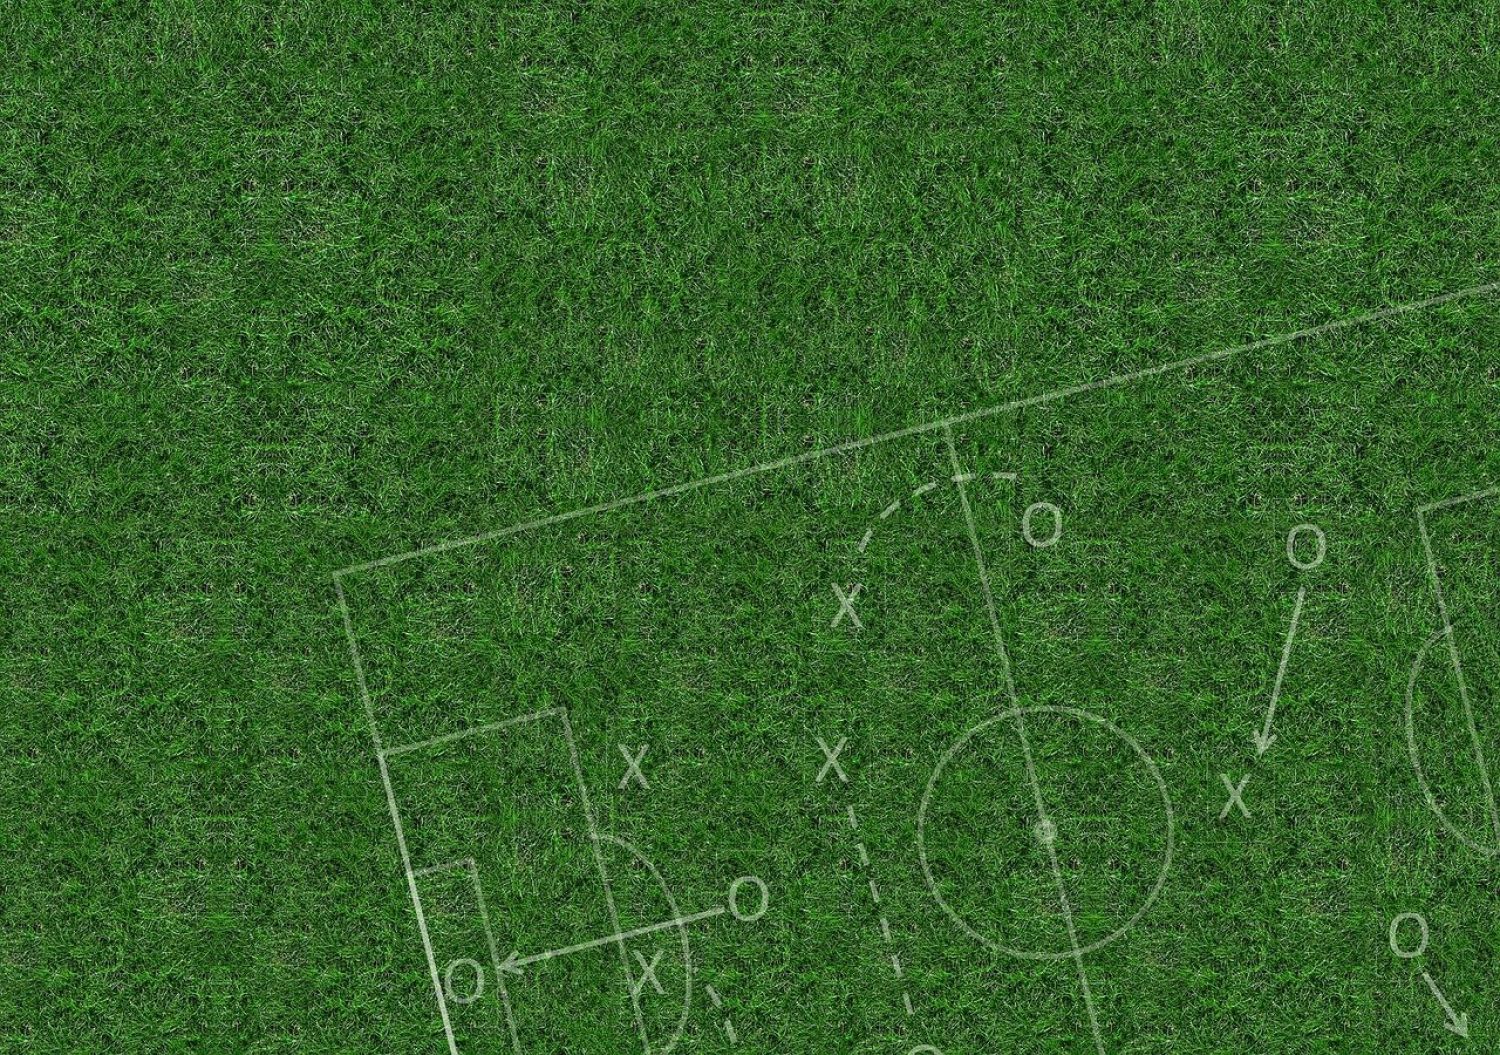 Green lawn with white outline of a soccer field